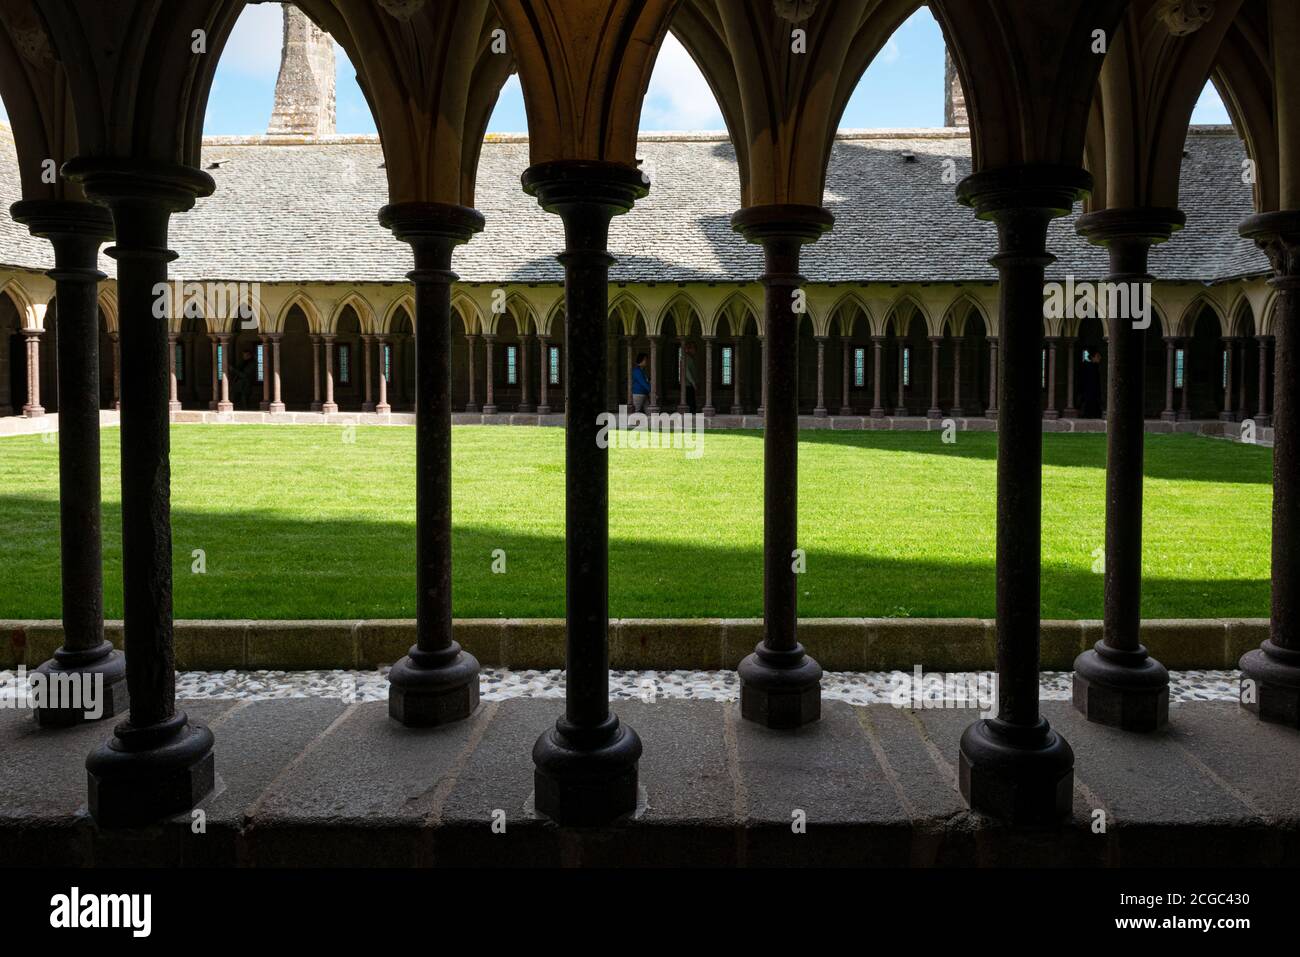 the Cloister of Mont Saint Michel with ribbed vault, pillars and lawn, Brittany, France Stock Photo